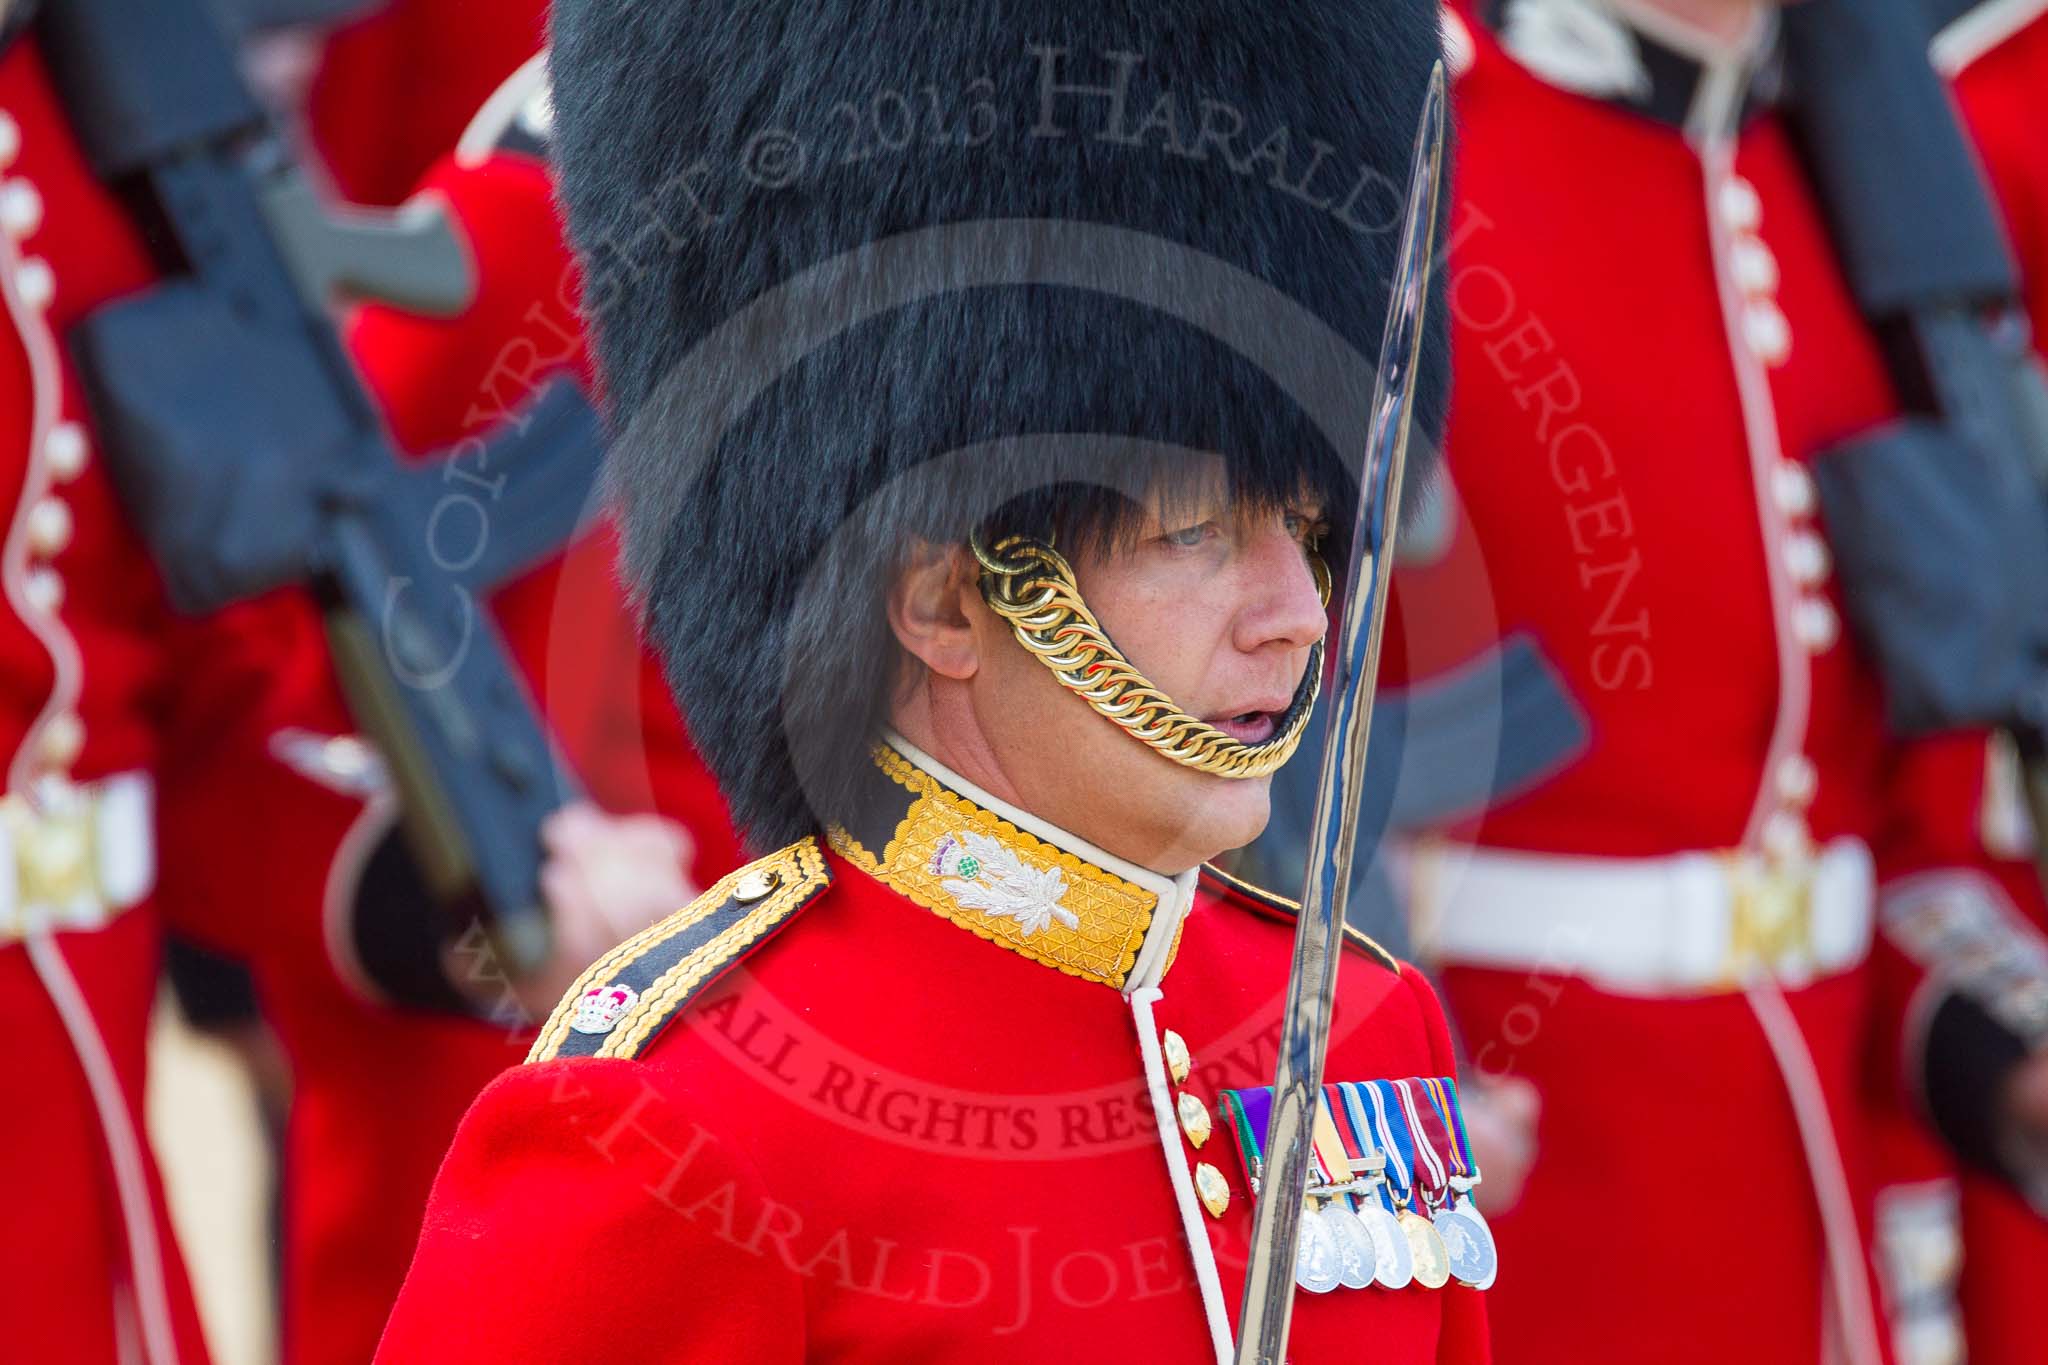 The Colonel's Review 2013: Major J A Hughes No. 5 Guard, F Company Scots Guards..
Horse Guards Parade, Westminster,
London SW1,

United Kingdom,
on 08 June 2013 at 11:36, image #645